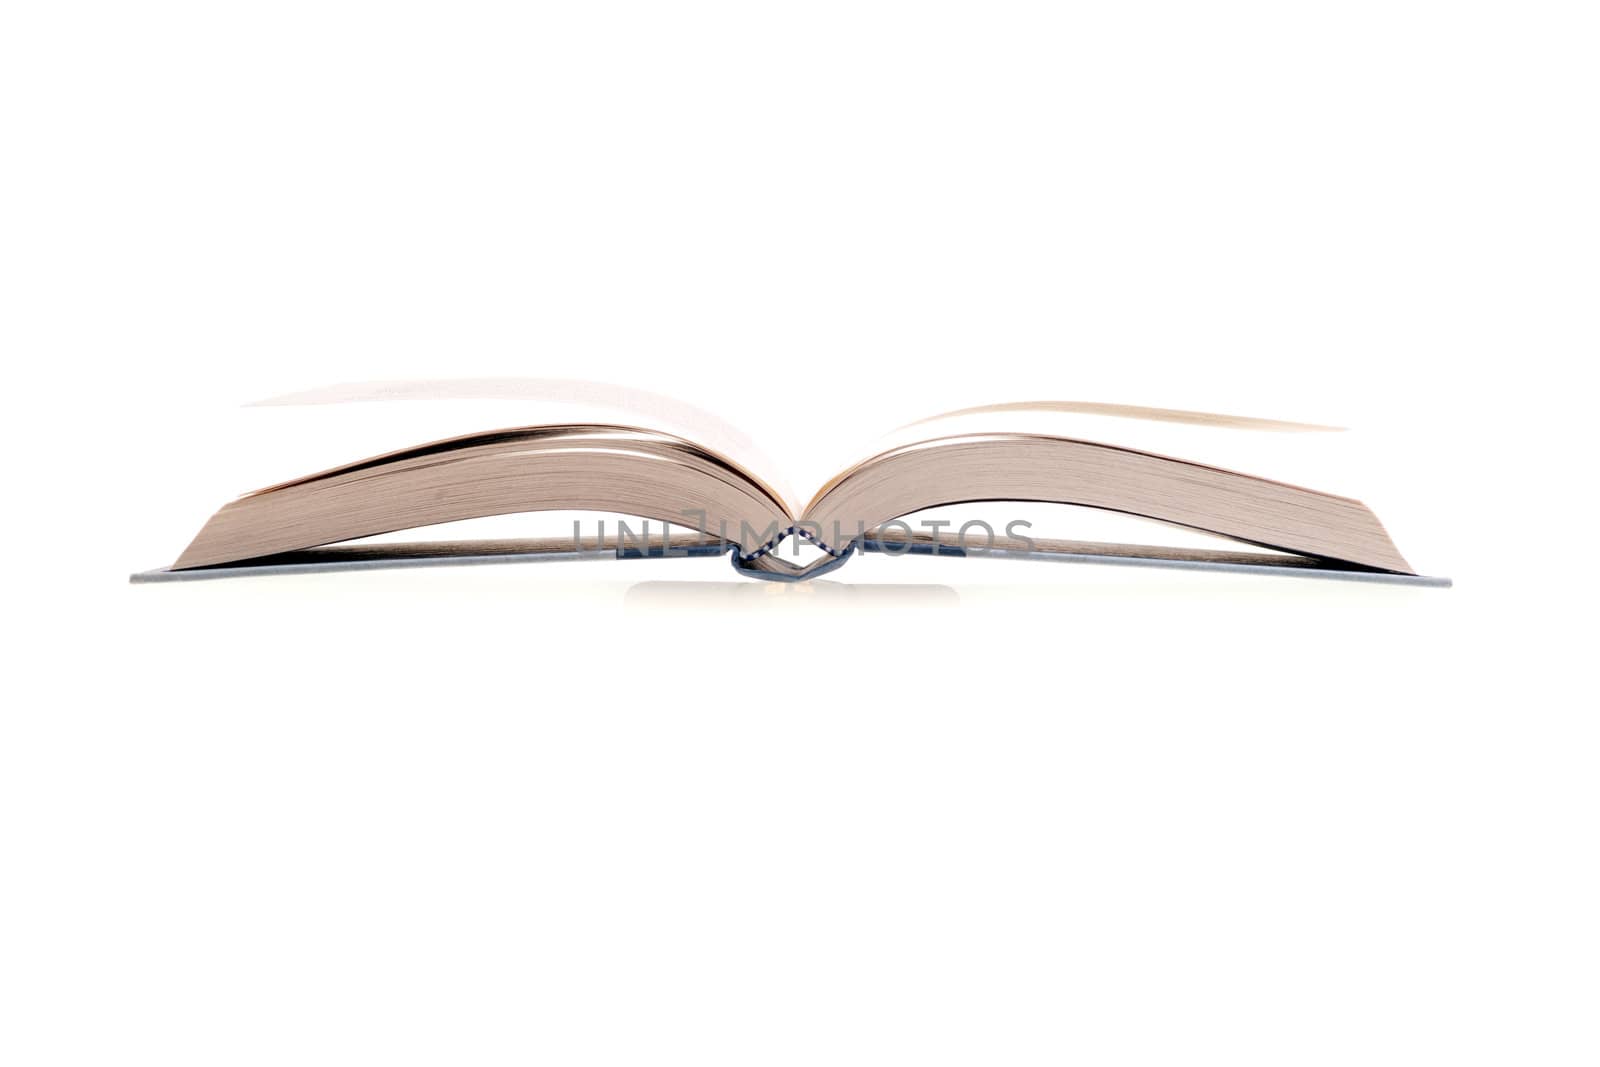 The open book image on white background